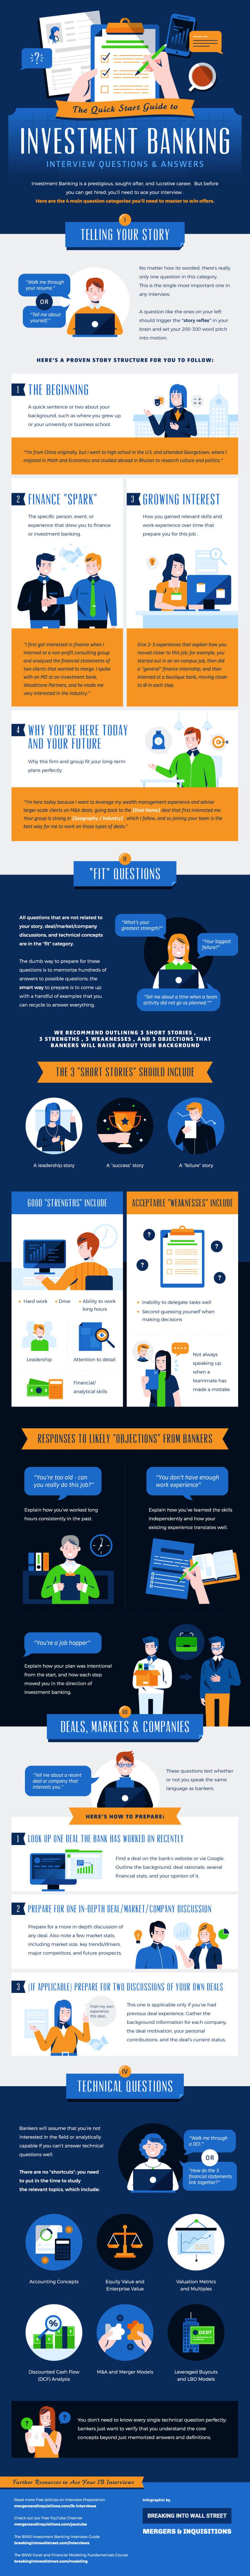 Investment Banking Interview Questions & Answers Infographic